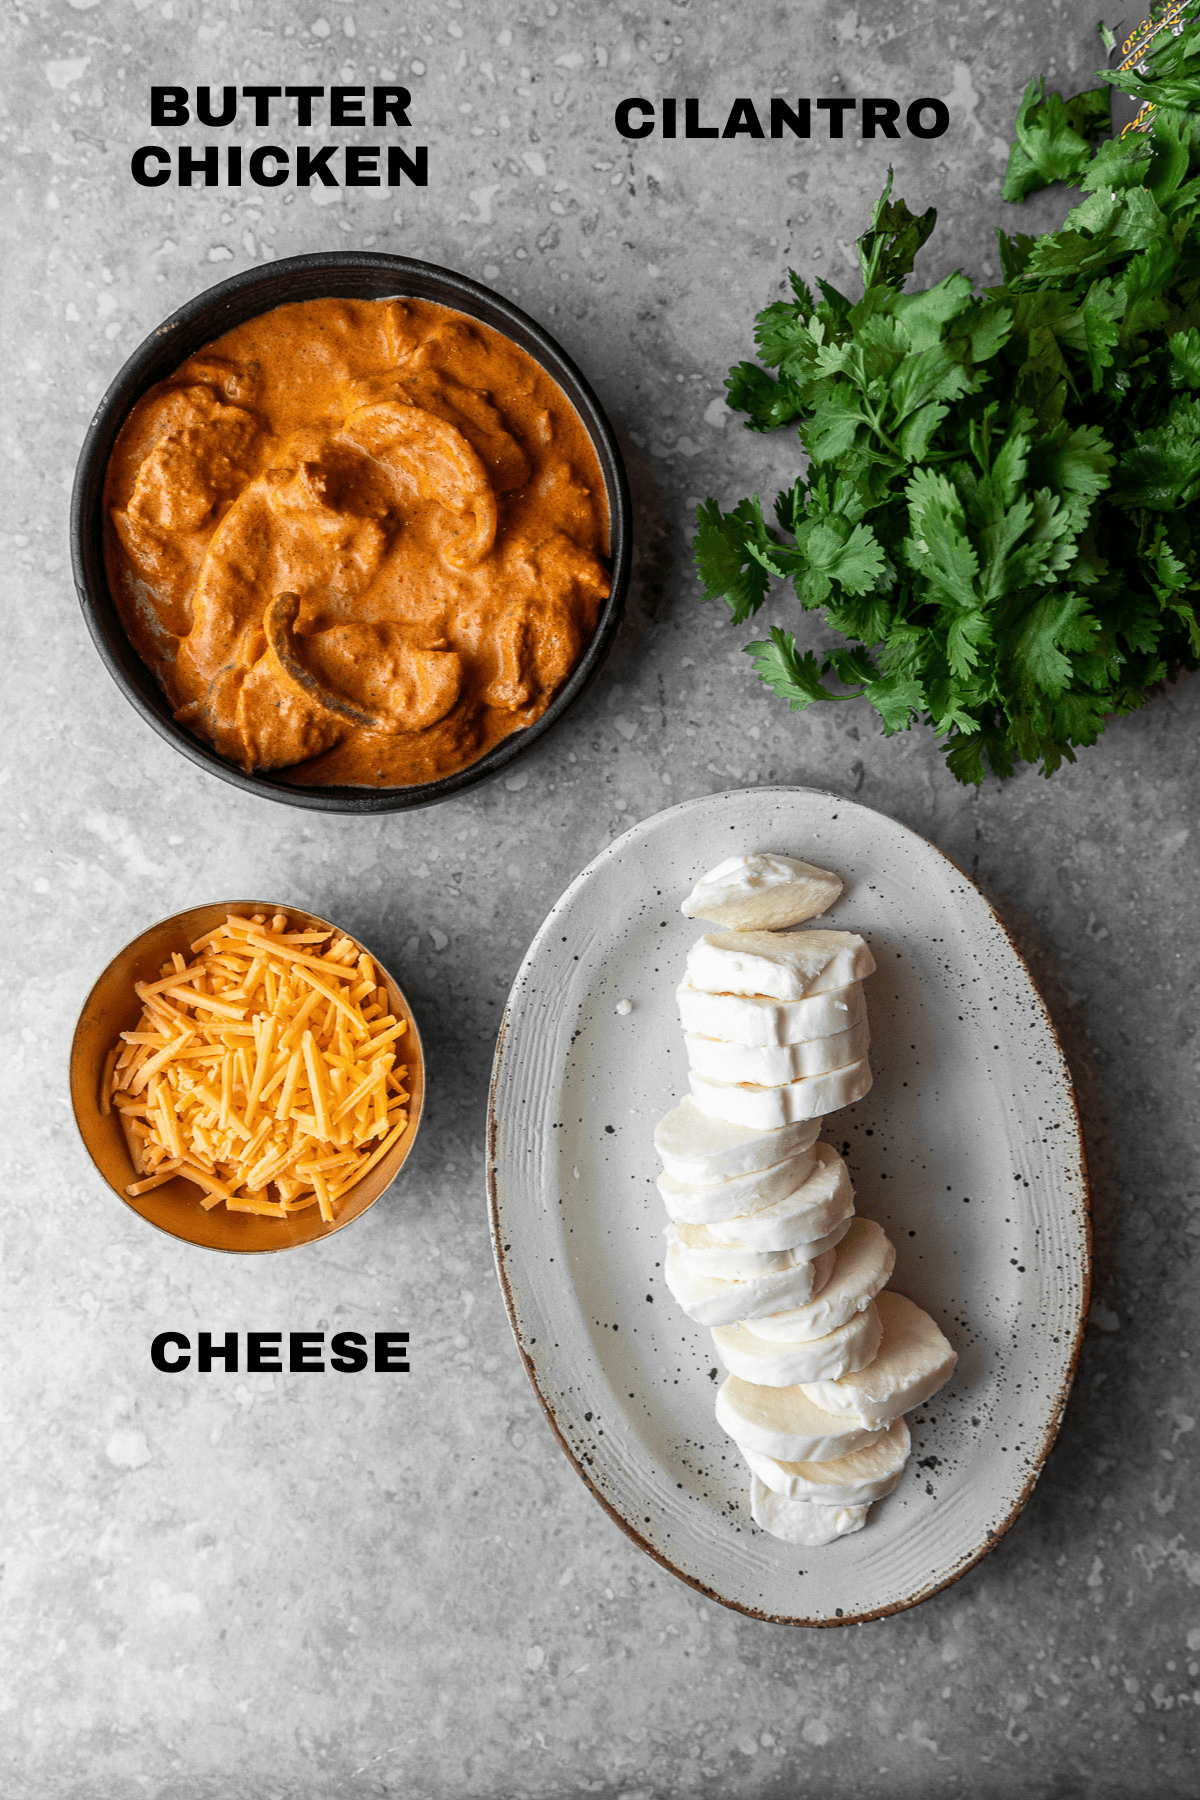 Butter Chicken, cilantro, and cheese ingredients with labels.